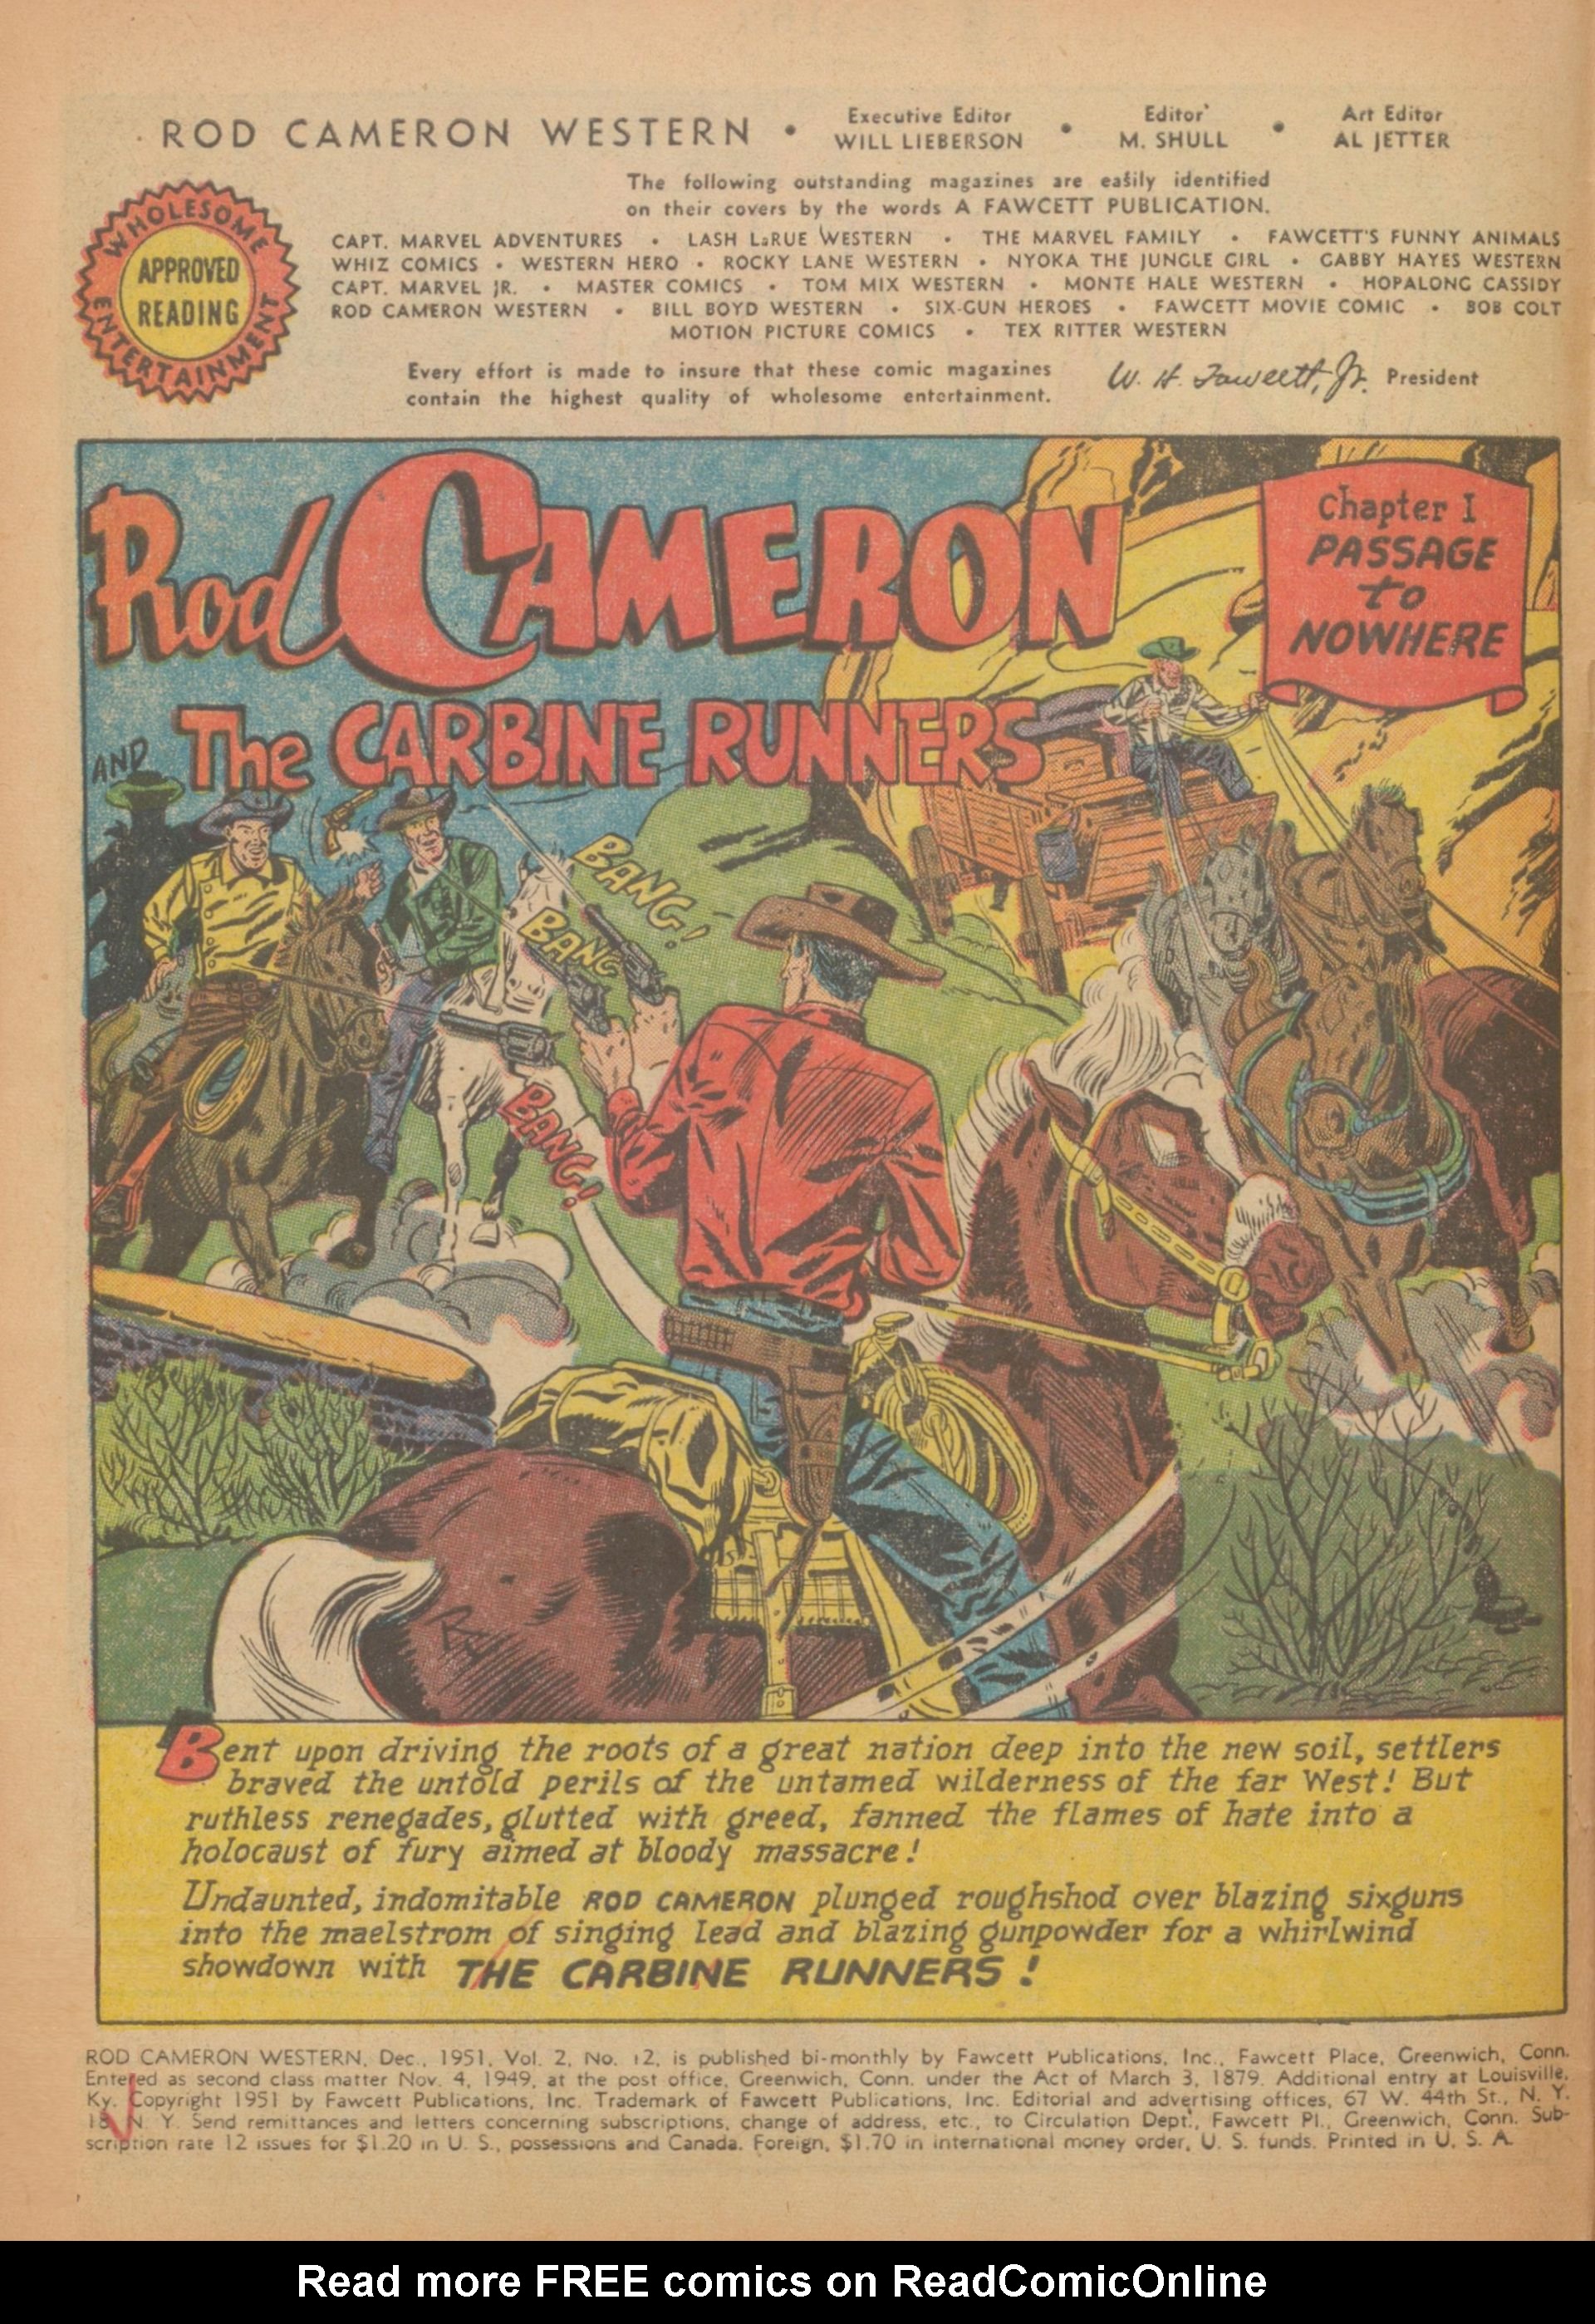 Read online Rod Cameron Western comic -  Issue #12 - 4